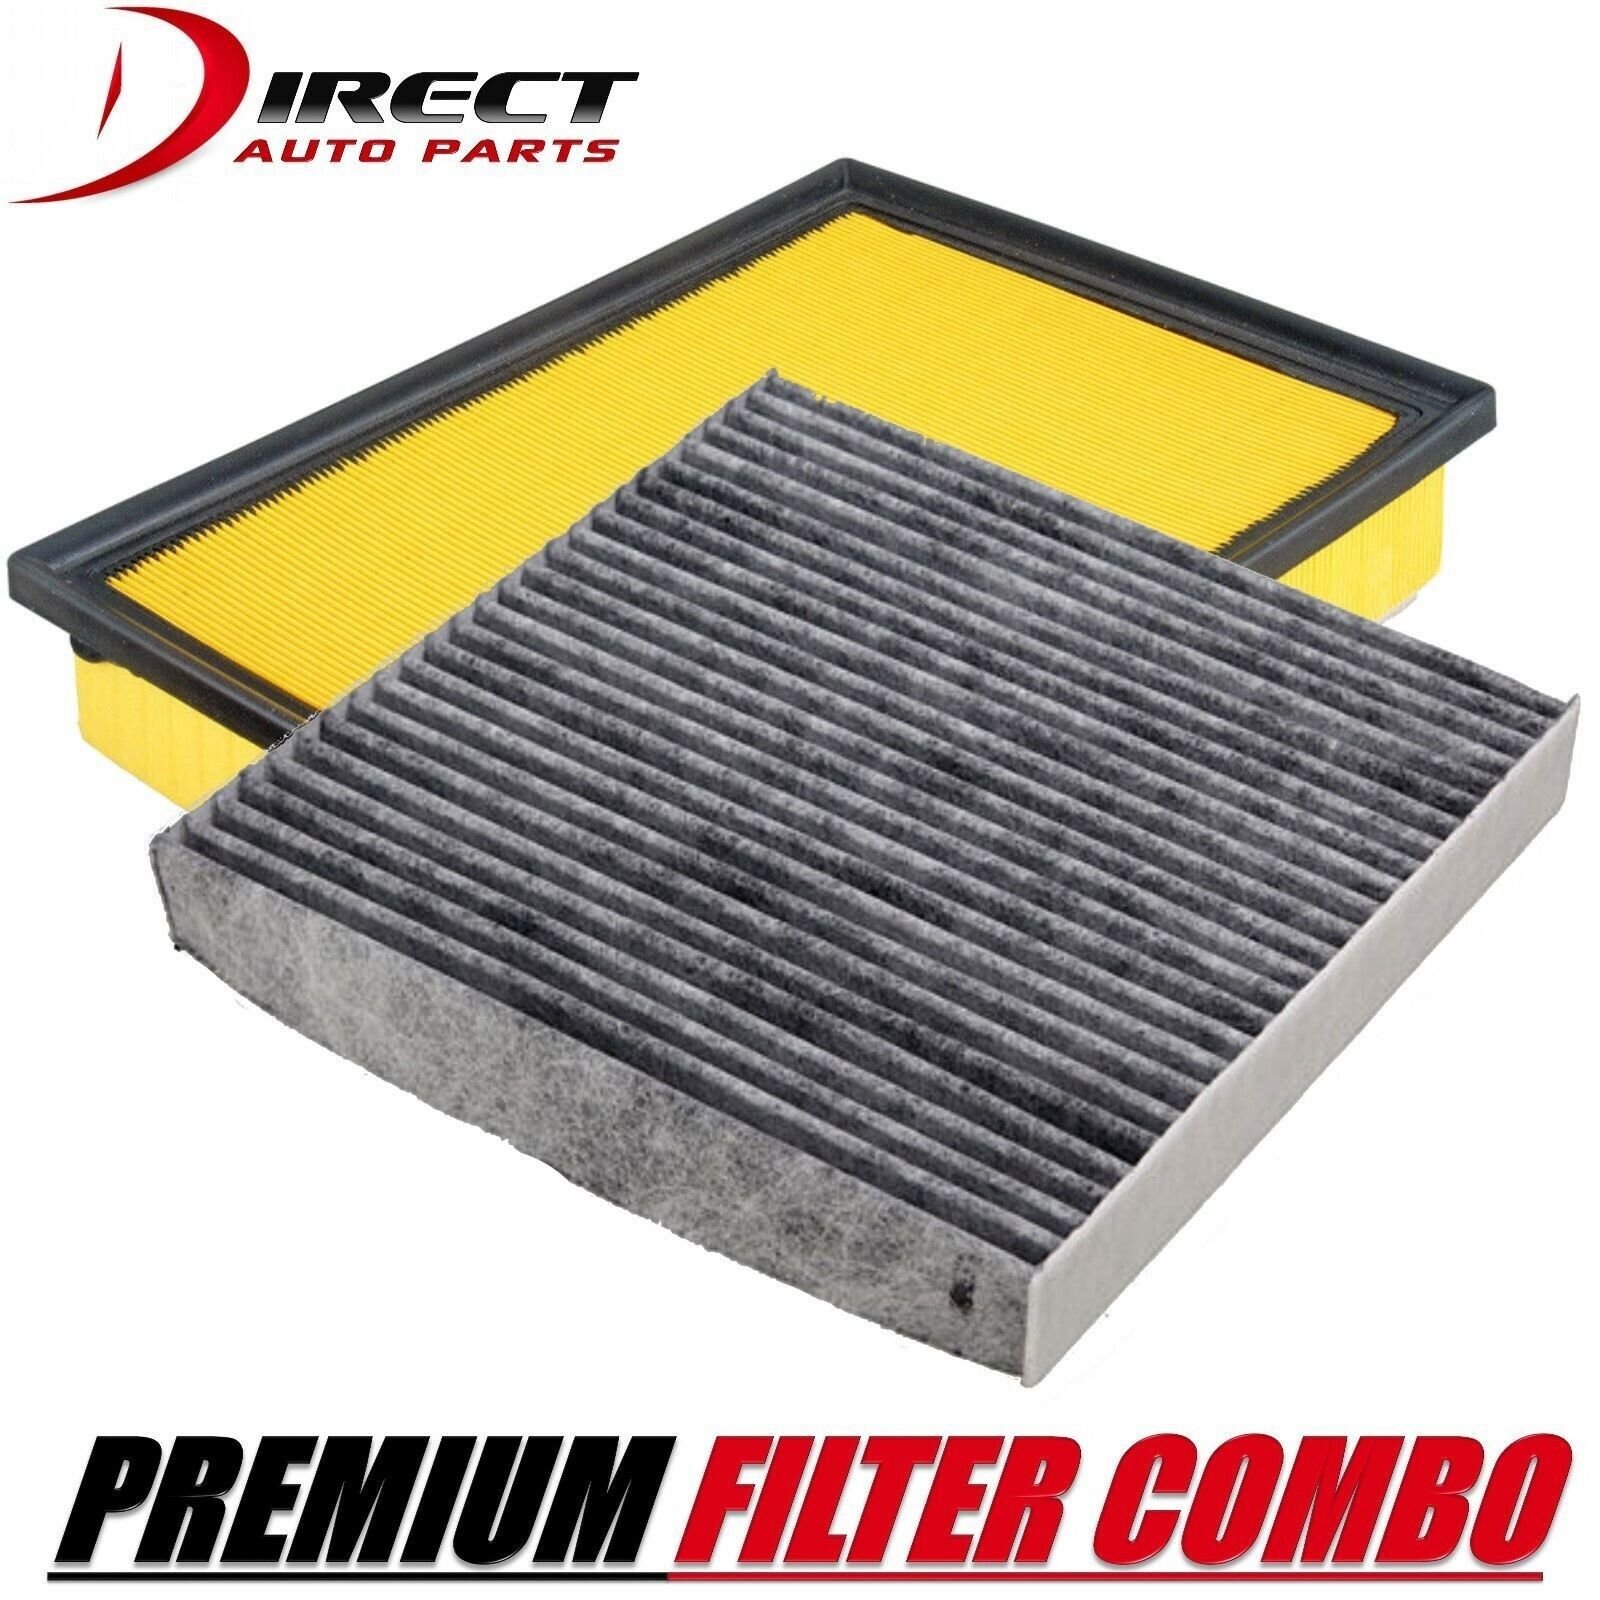 TOYOTA CARBON CABIN & AIR FILTER COMBO FOR TOYOTA SIENNA 3.5L ENGINE 2016 - 2011